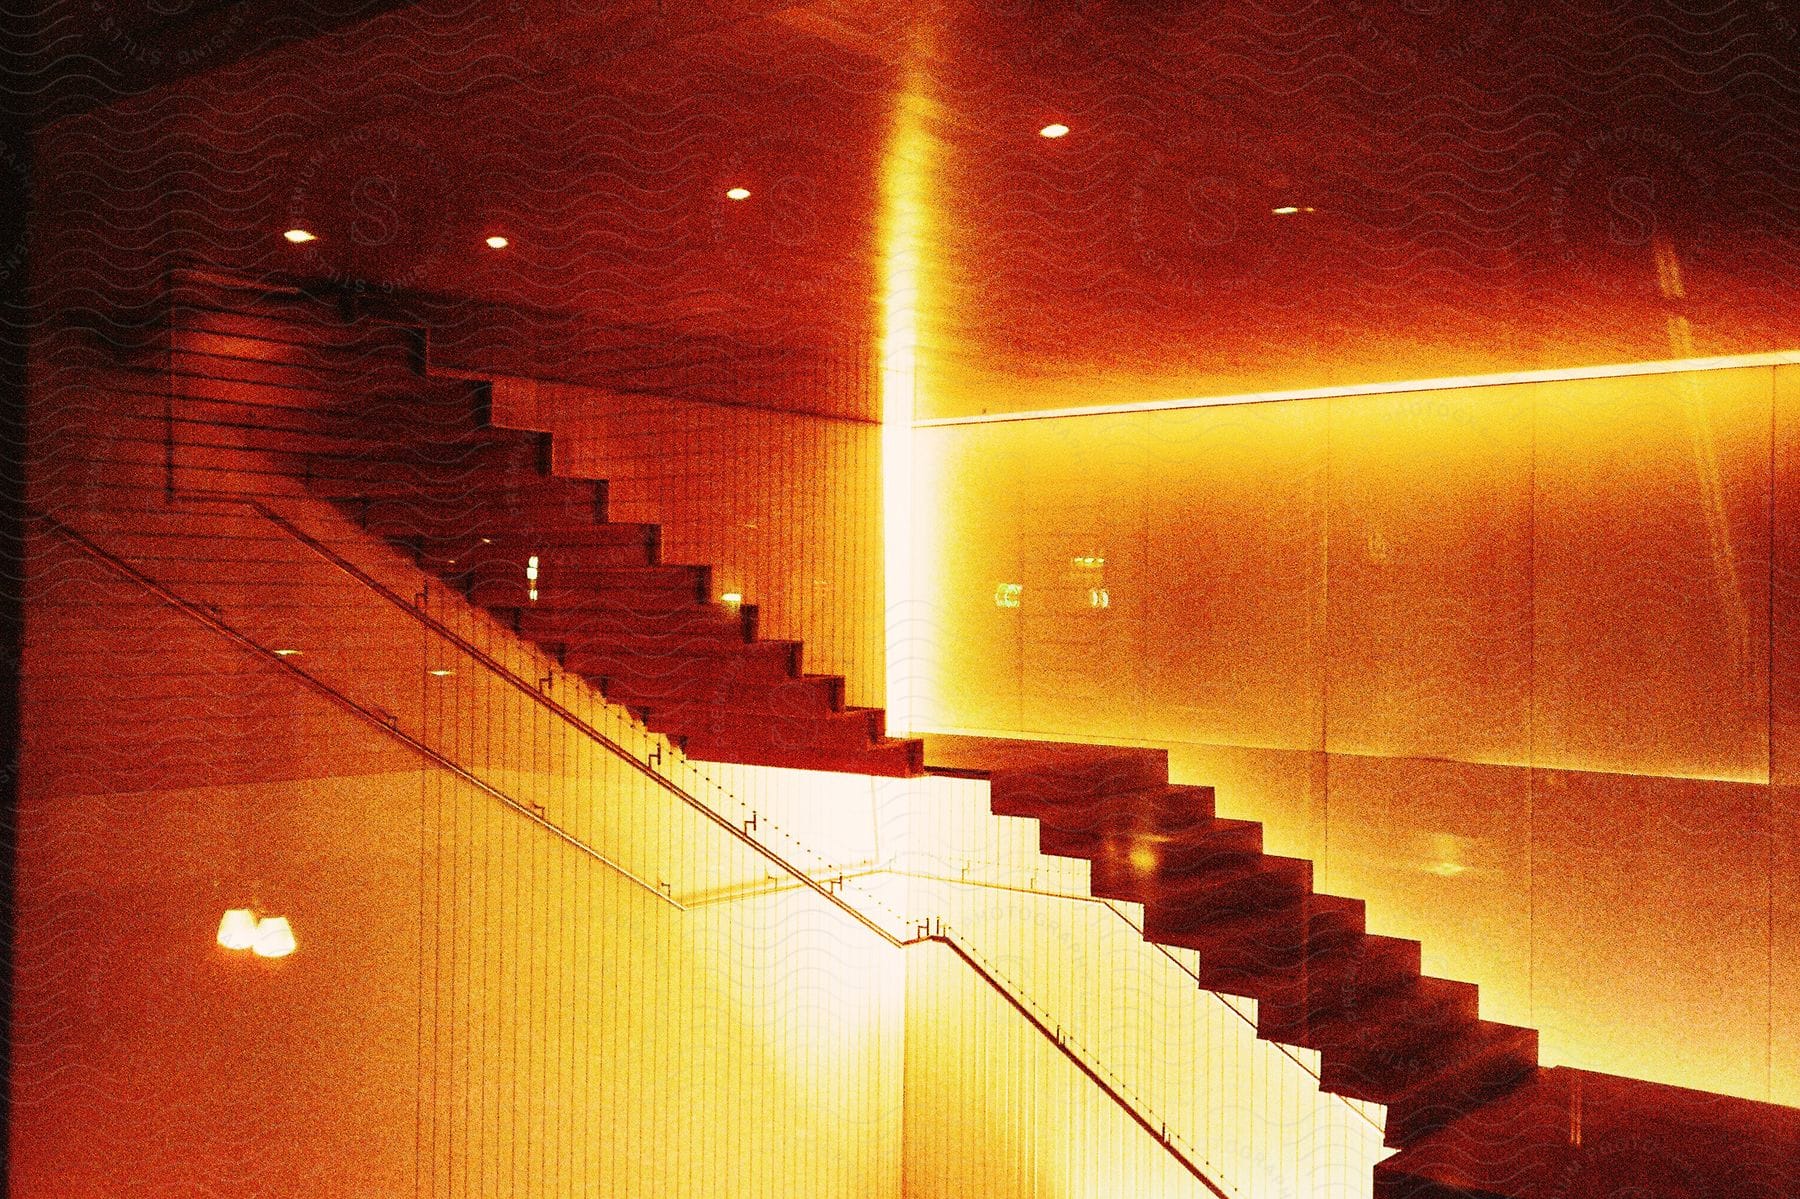 Indoors staircases under intense orange lights in an architecture setting